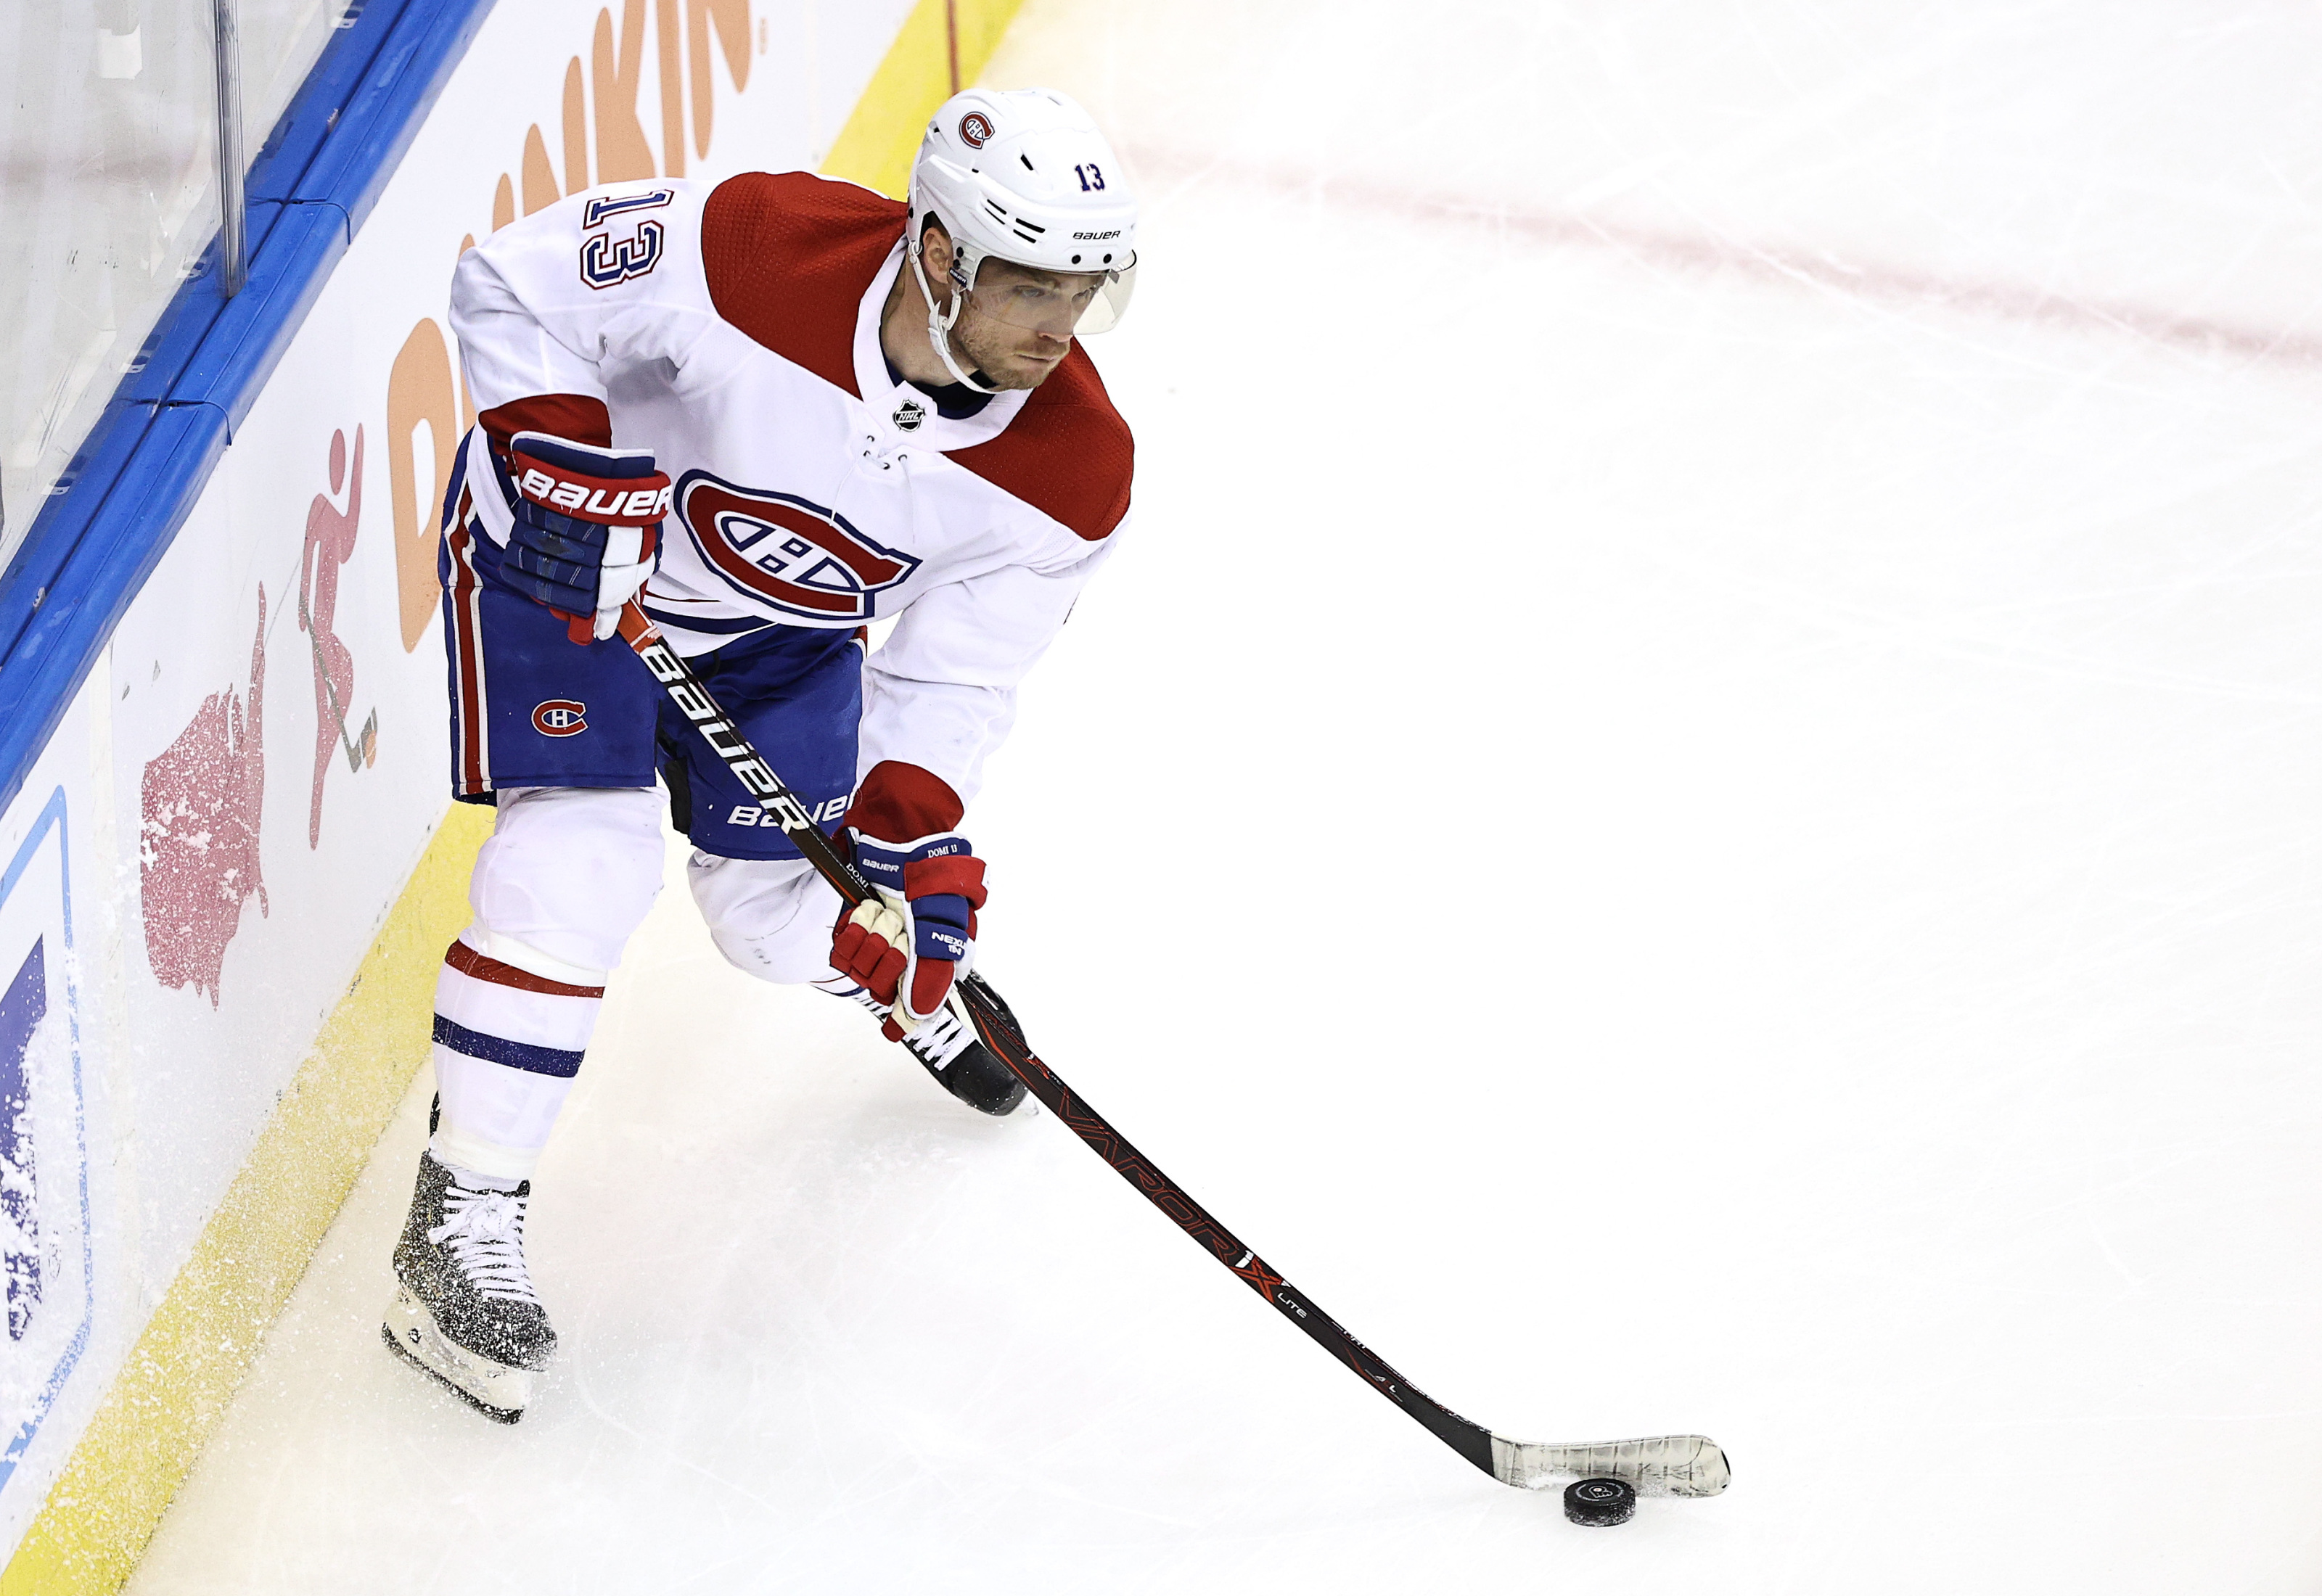 Suzuki reacts to Habs jersey tossed on ice: I can see why fans are